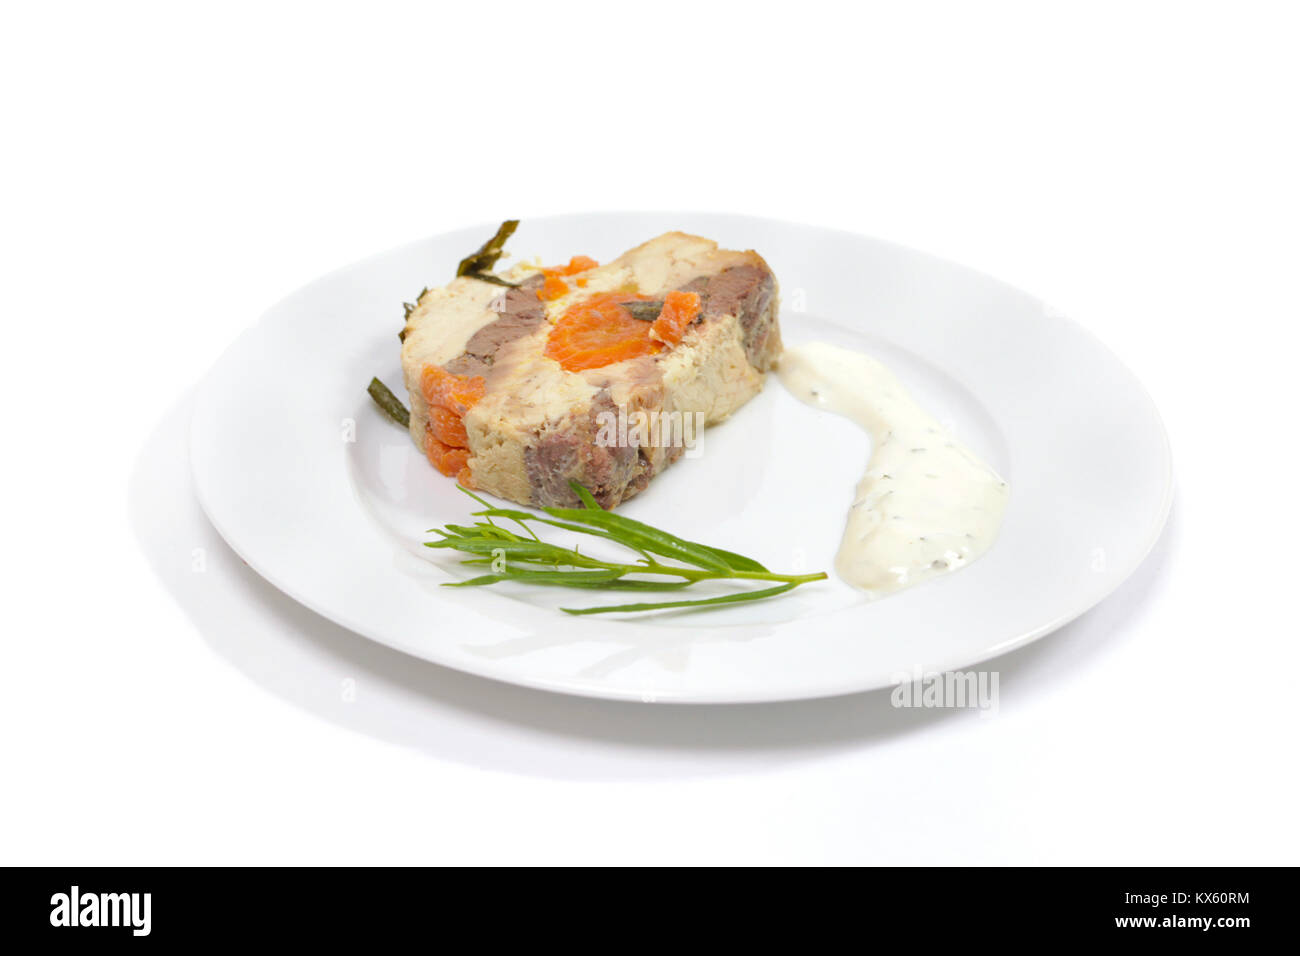 Chicken pate with tarragon and sauce Stock Photo